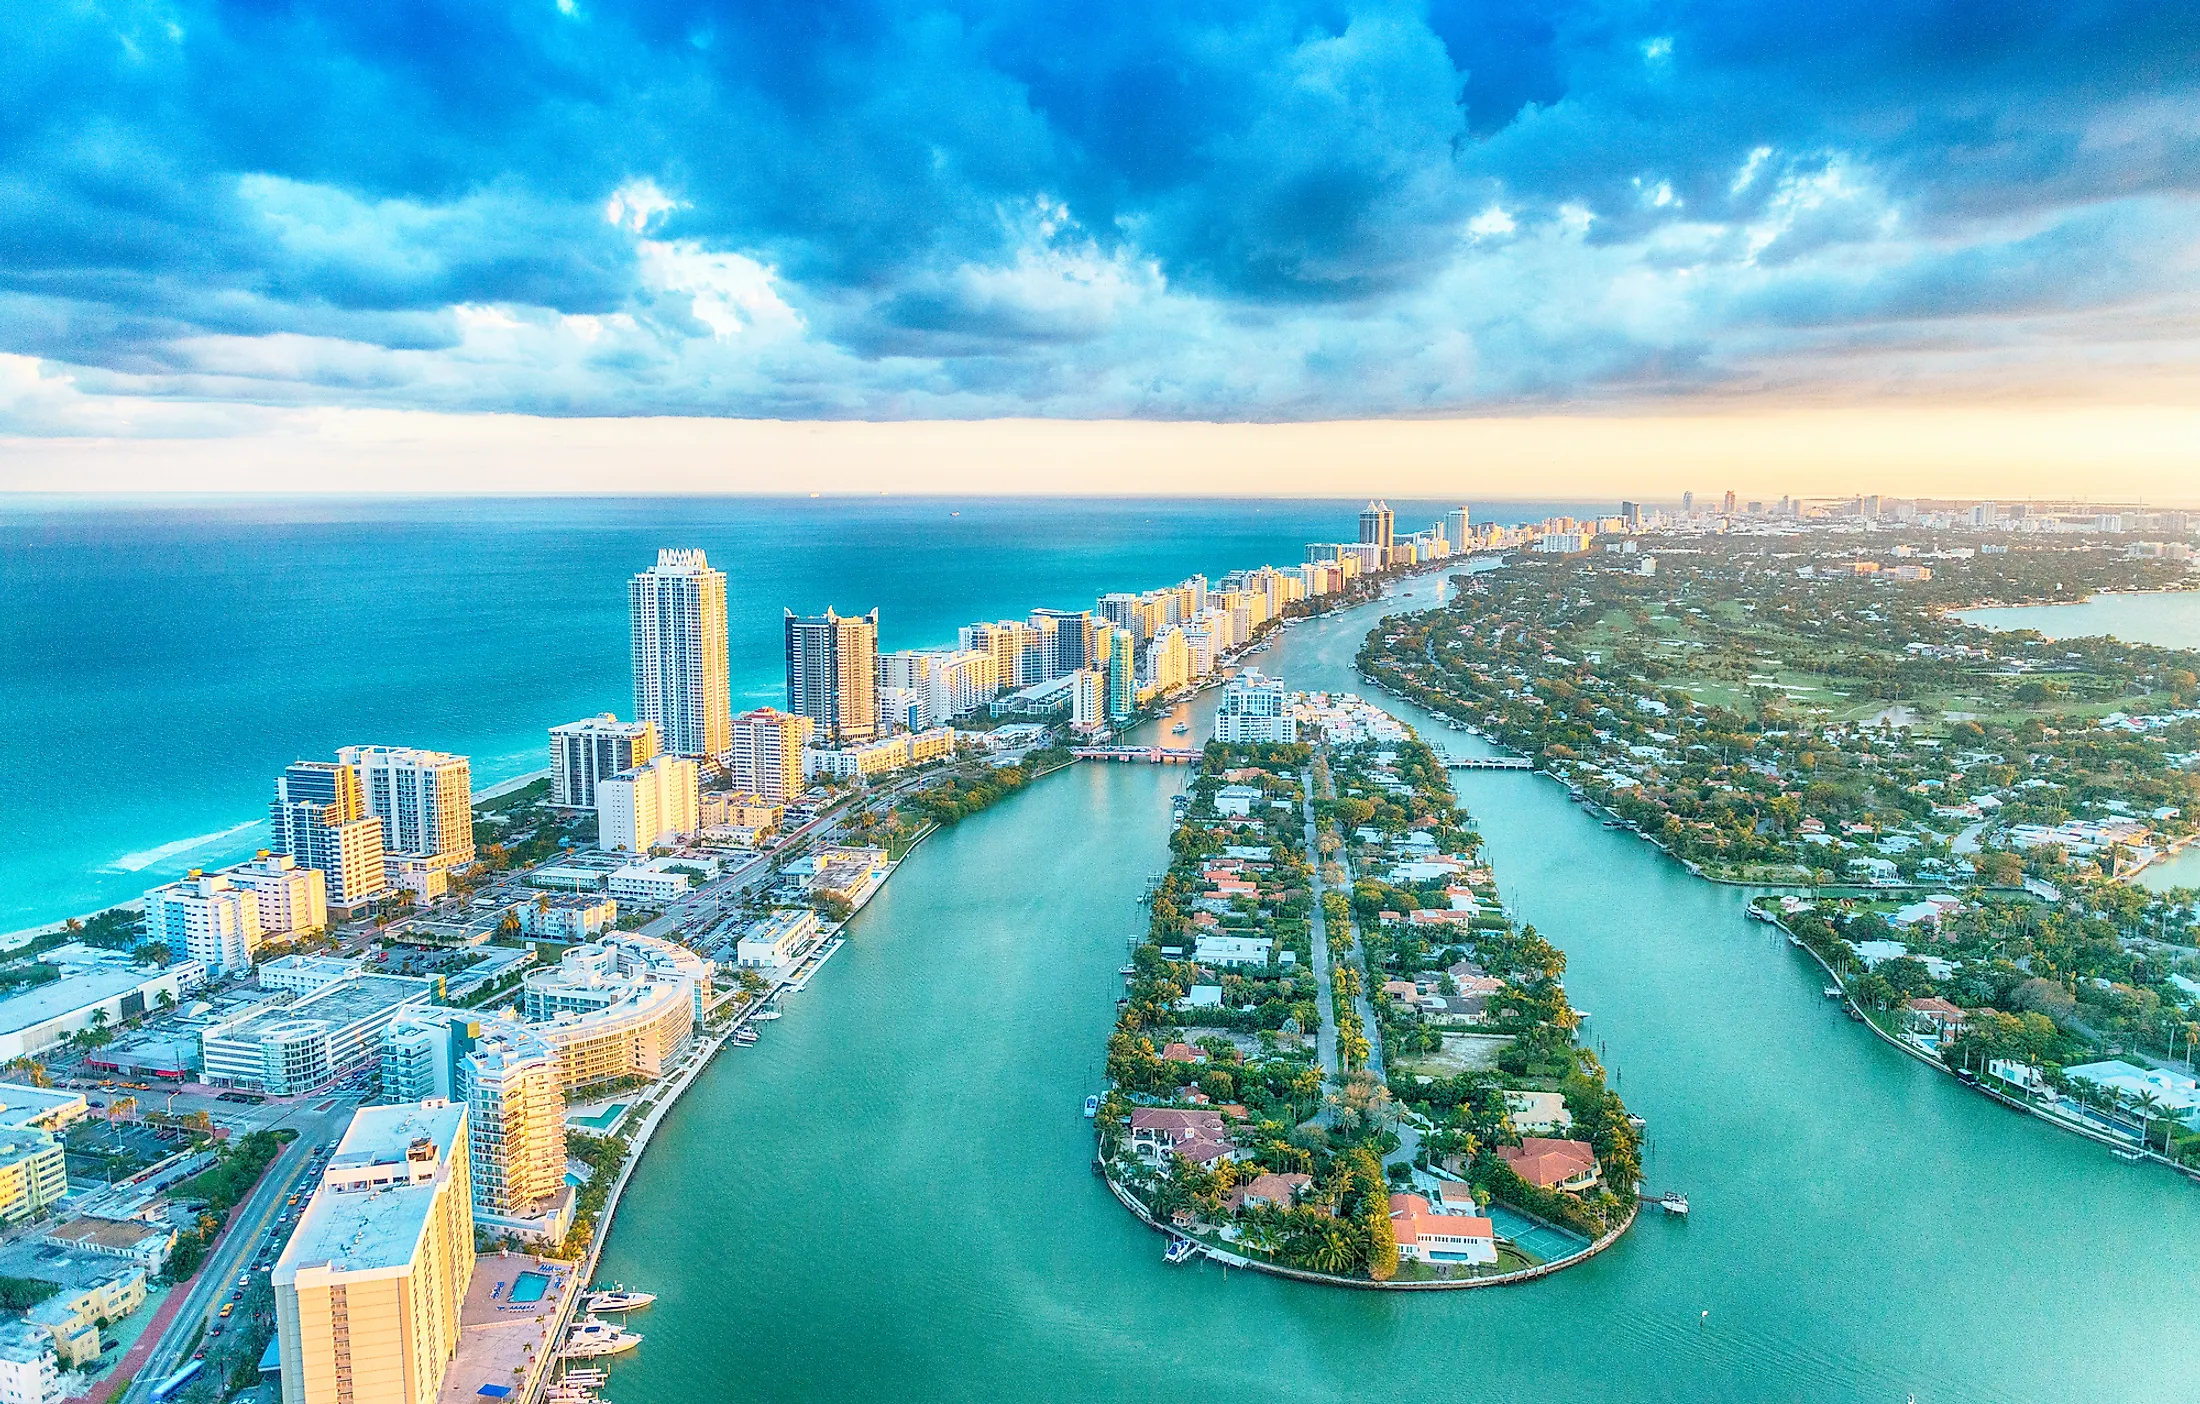 Explore Miami: 11 Amazing Things to Do in the Magic City